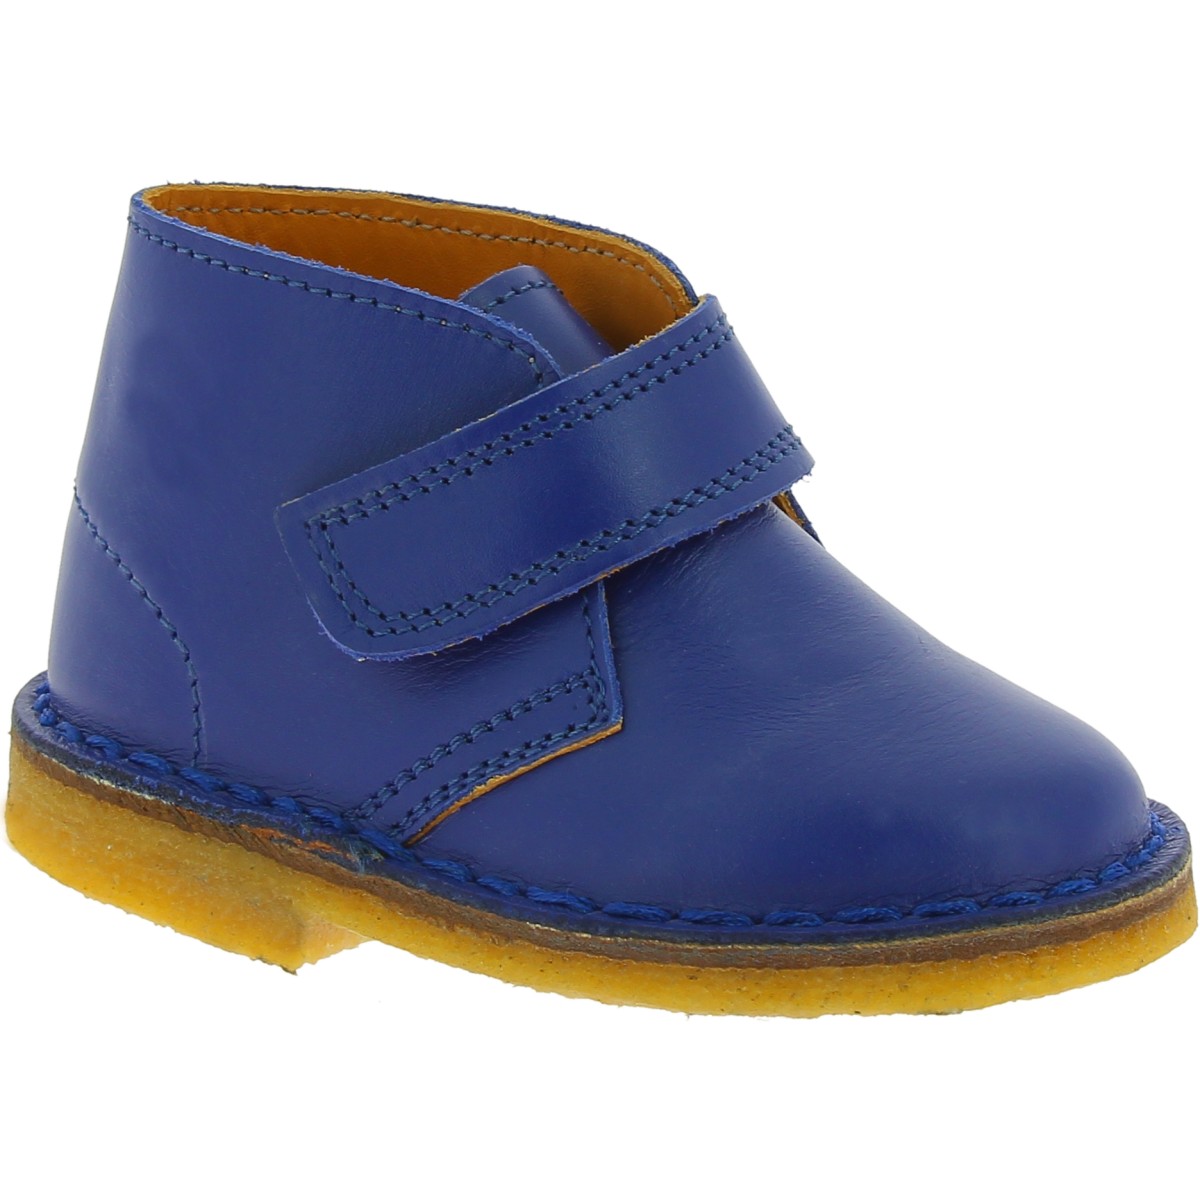 Kid's ankle boots in real blue leather handmade in Italy | The leather ...